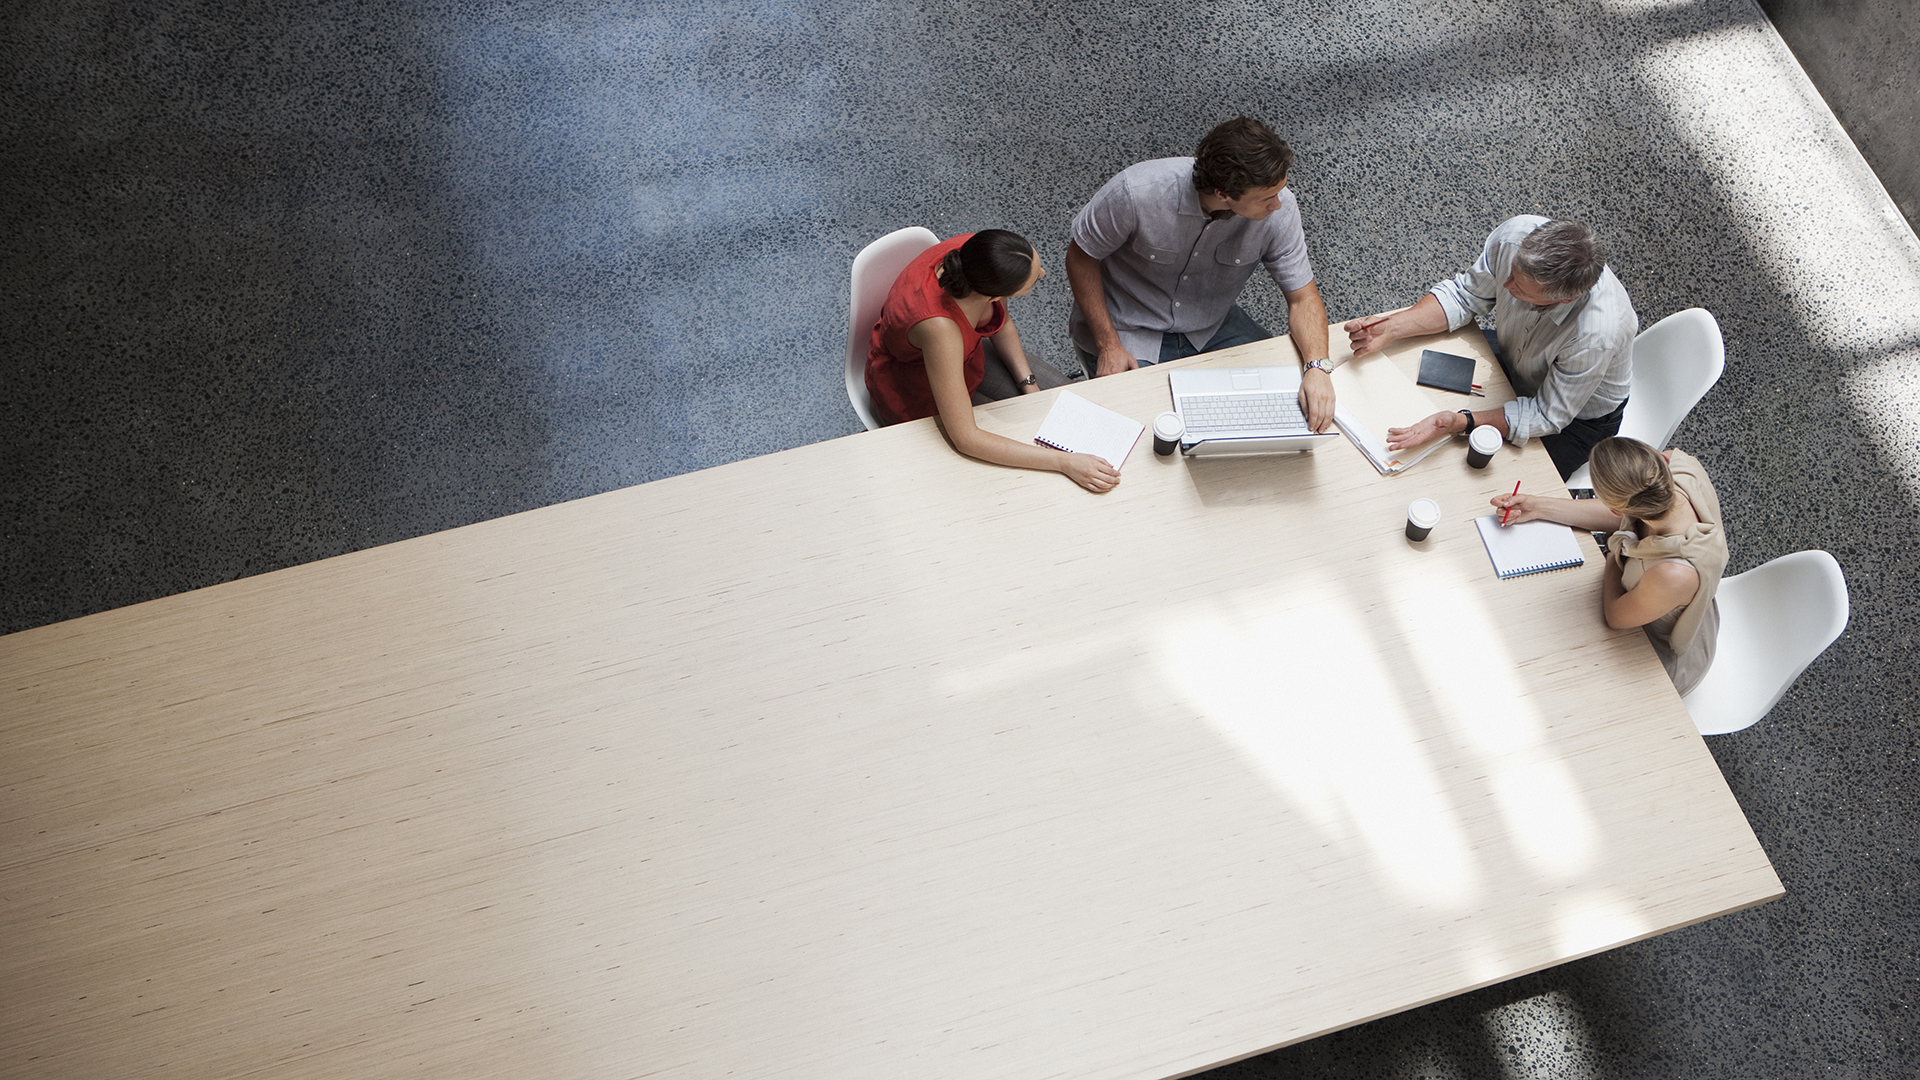 Four co-workers gather around a meeting table